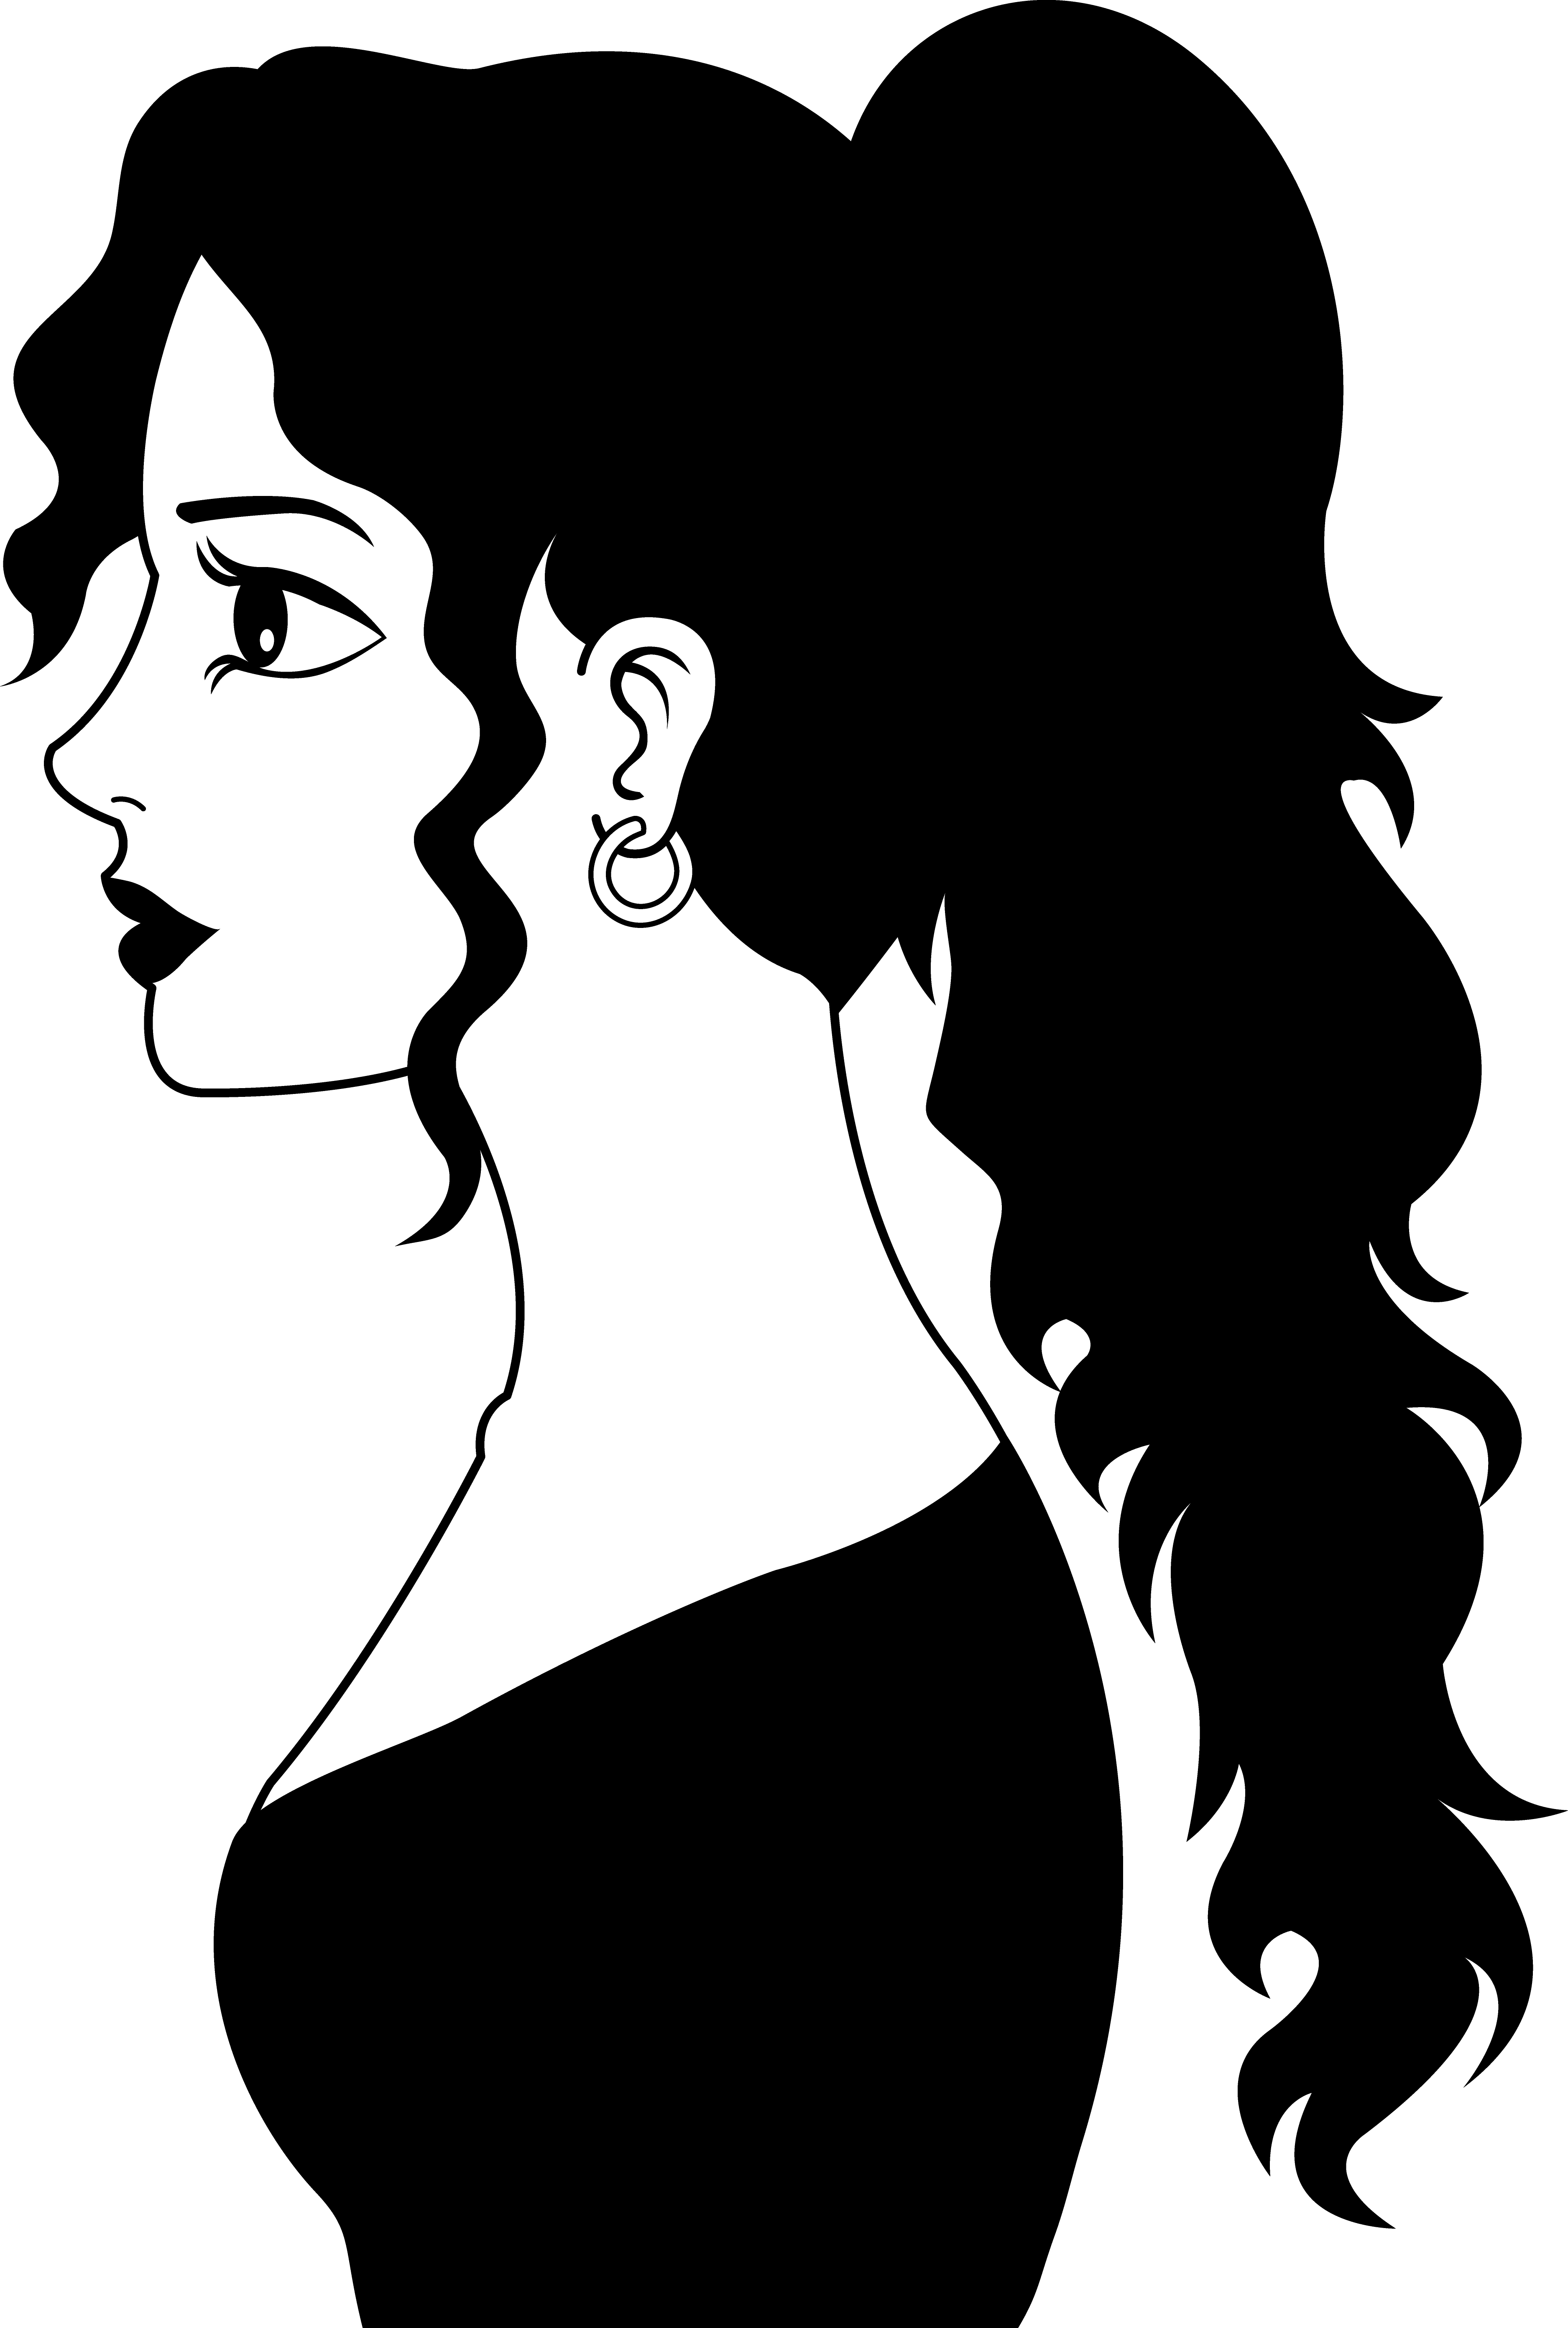 Woman Clip Art Black And White | Clipart library - Free Clipart Images